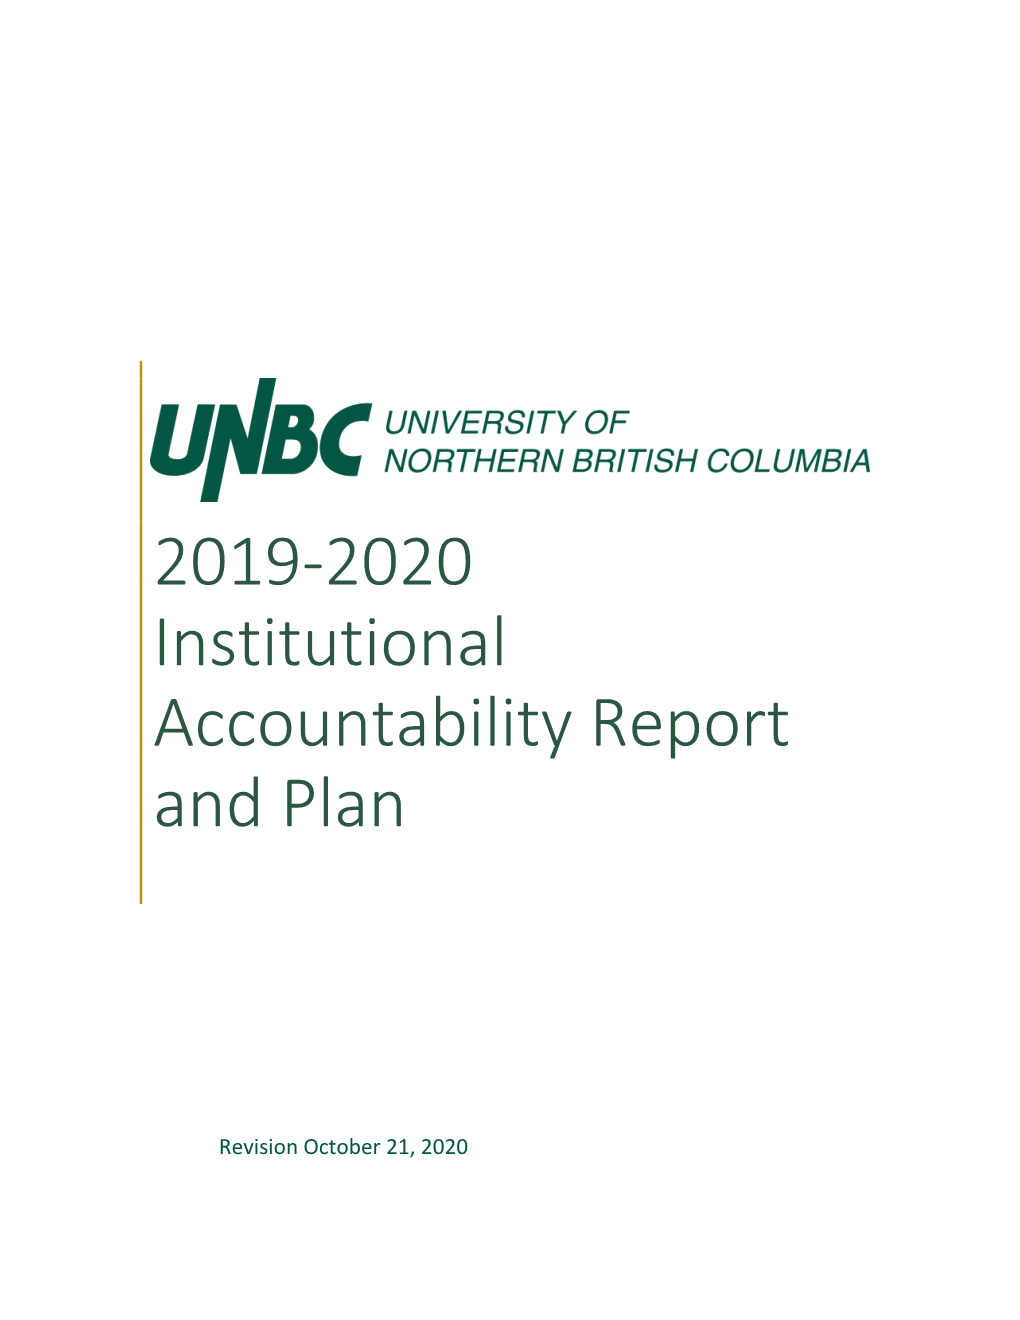 2019-2020 Institutional Accountability Report and Plan